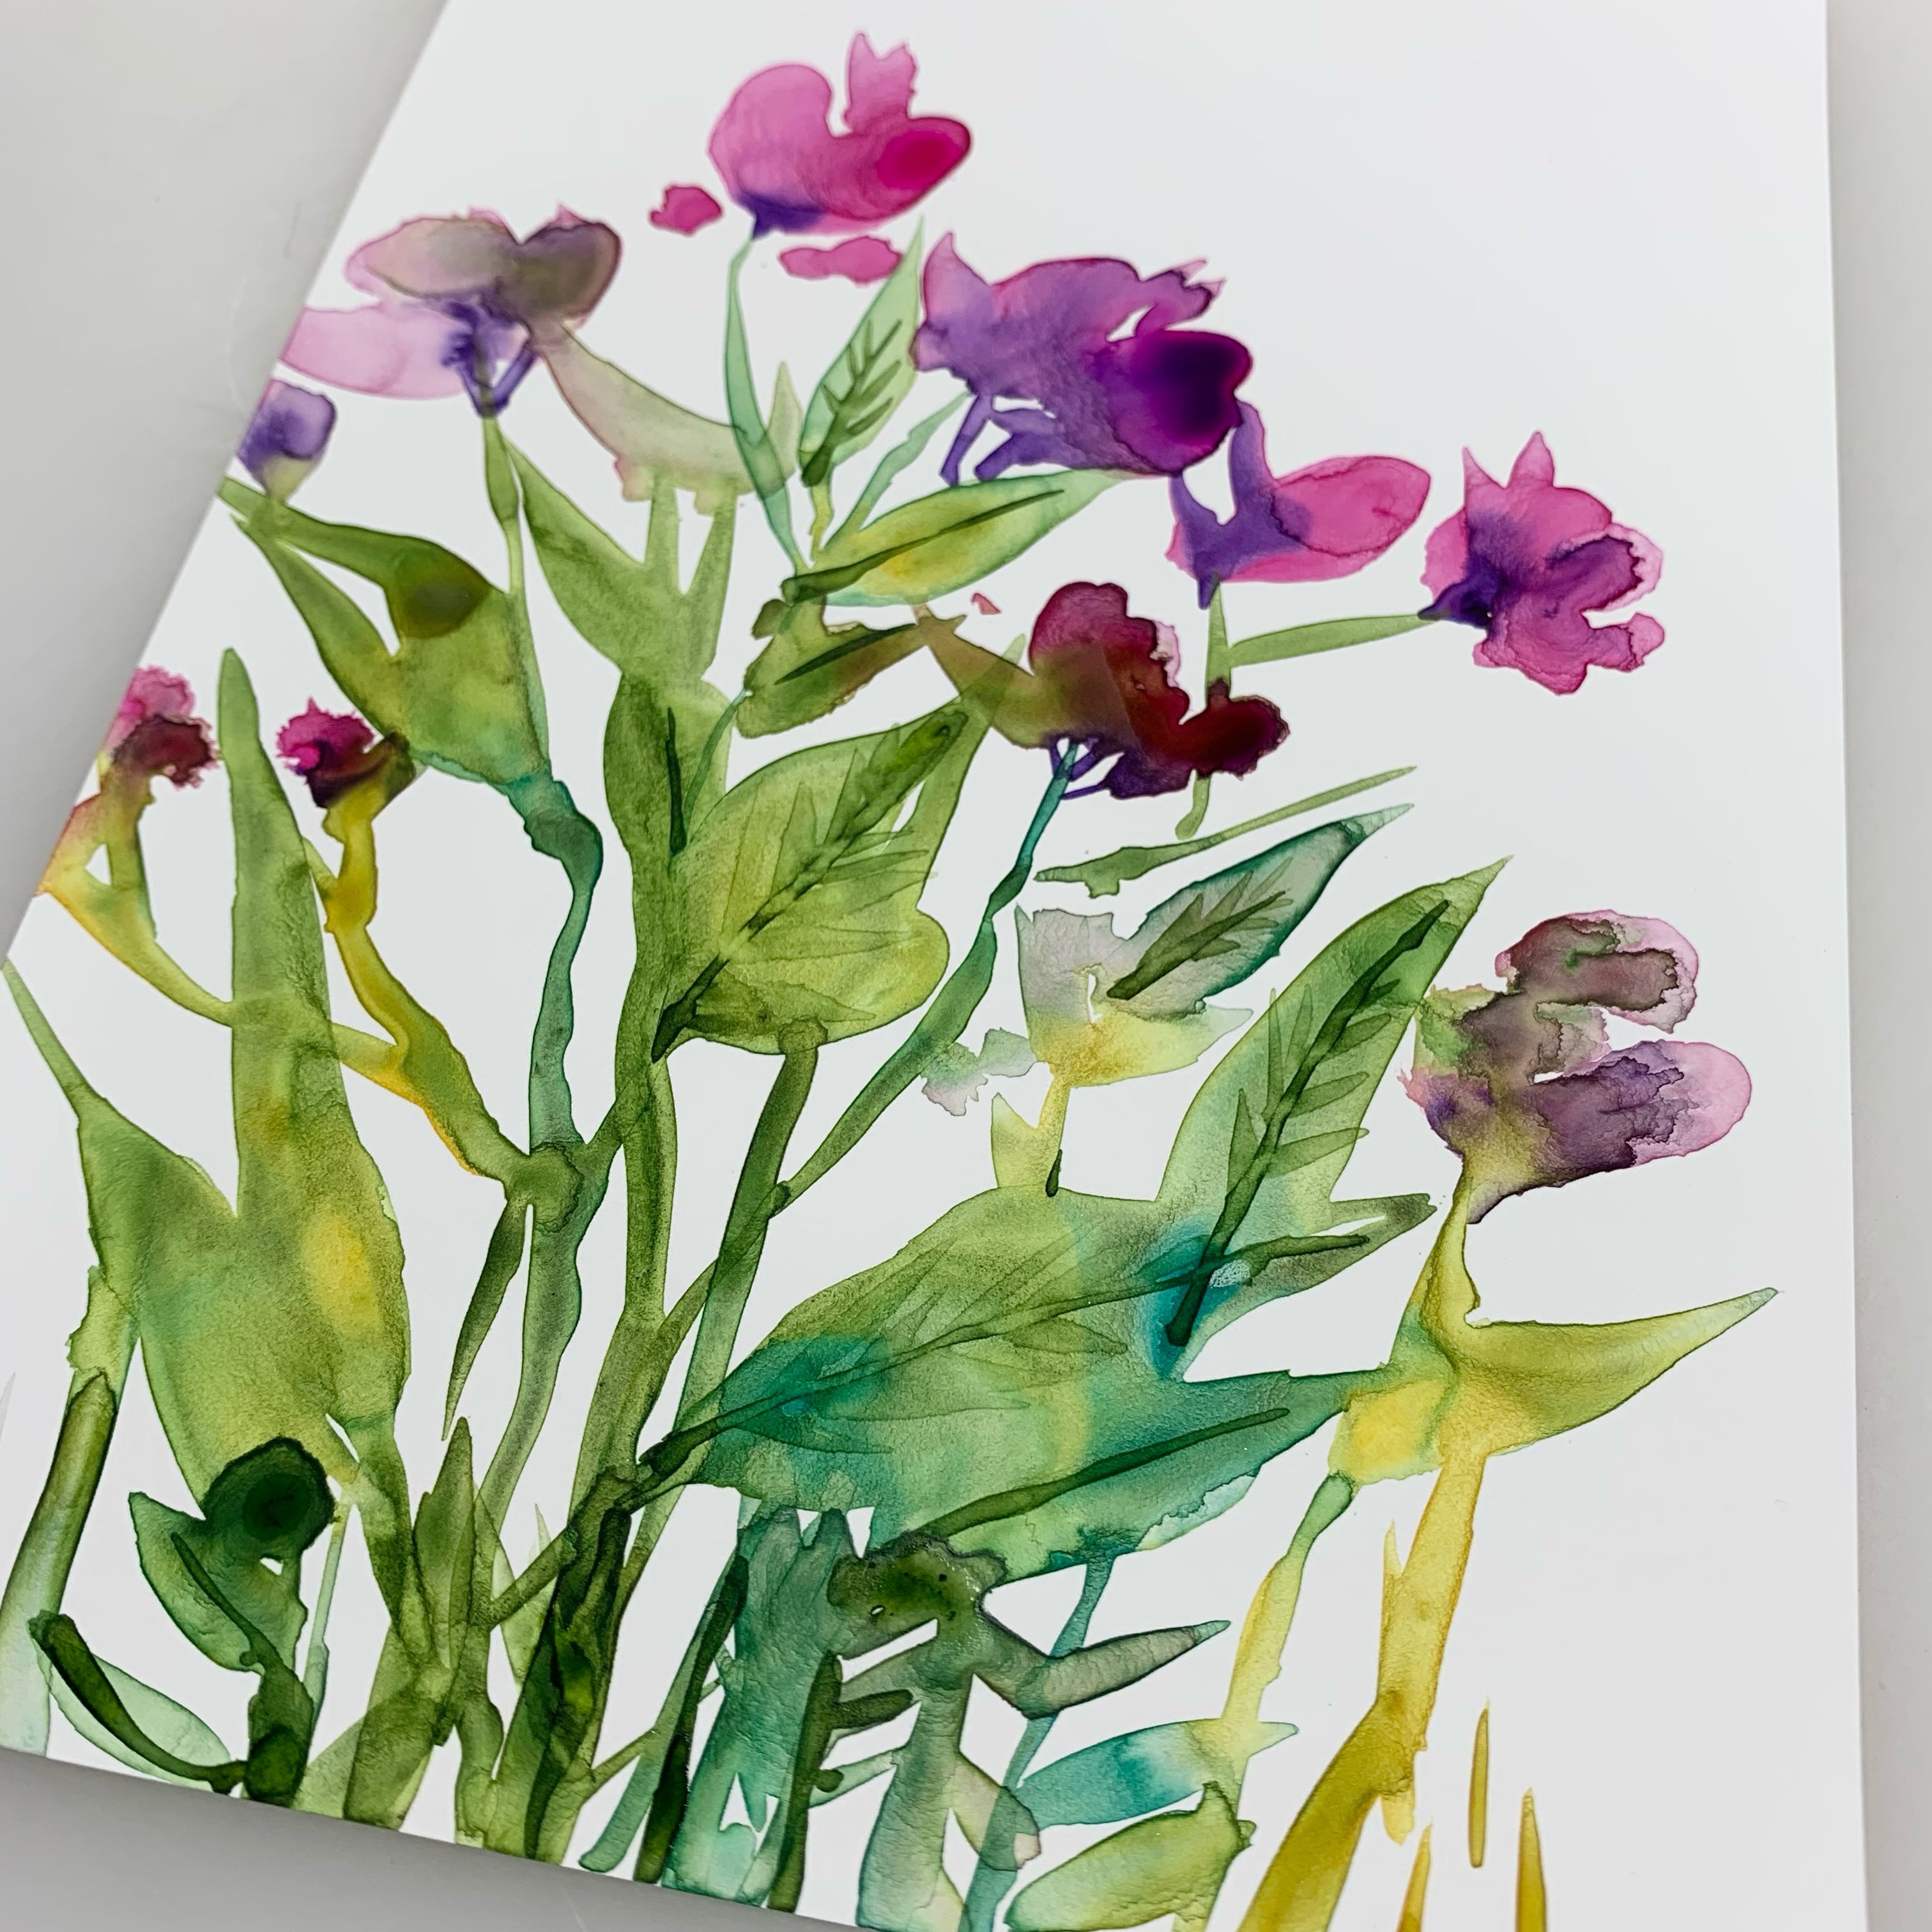 Playing with Watercolors on Mineral Paper – Yasutomo